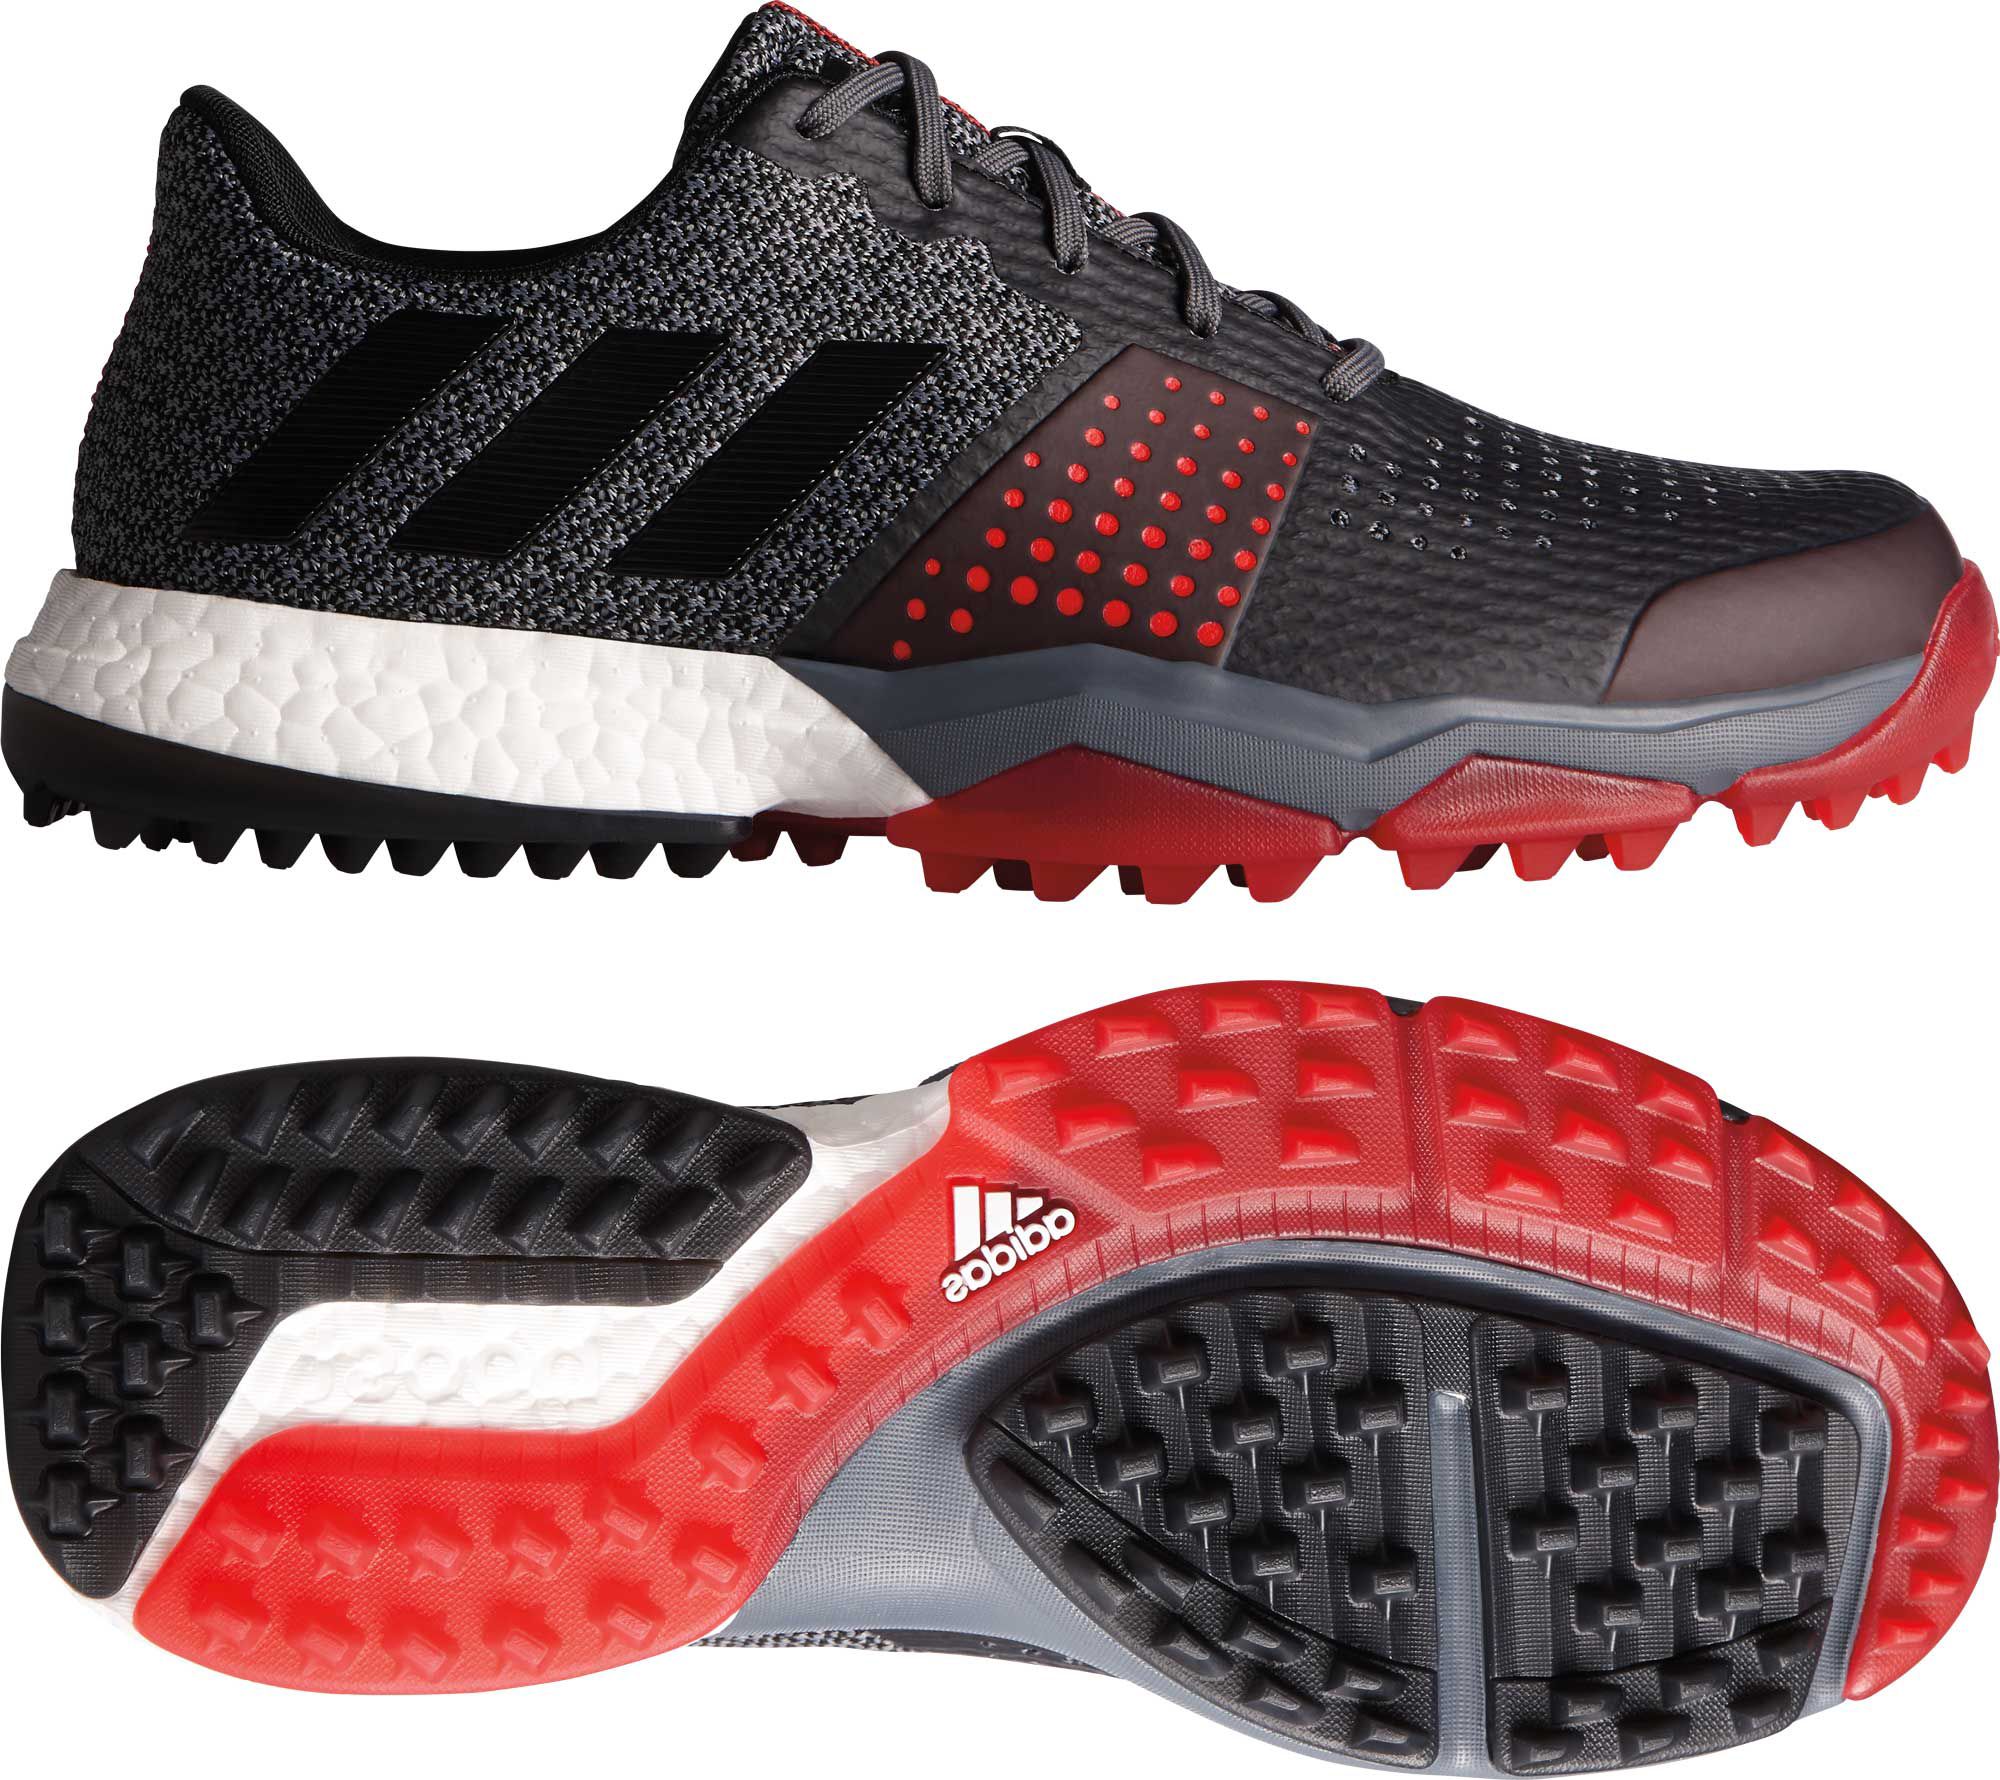 adipower s boost 3 shoes